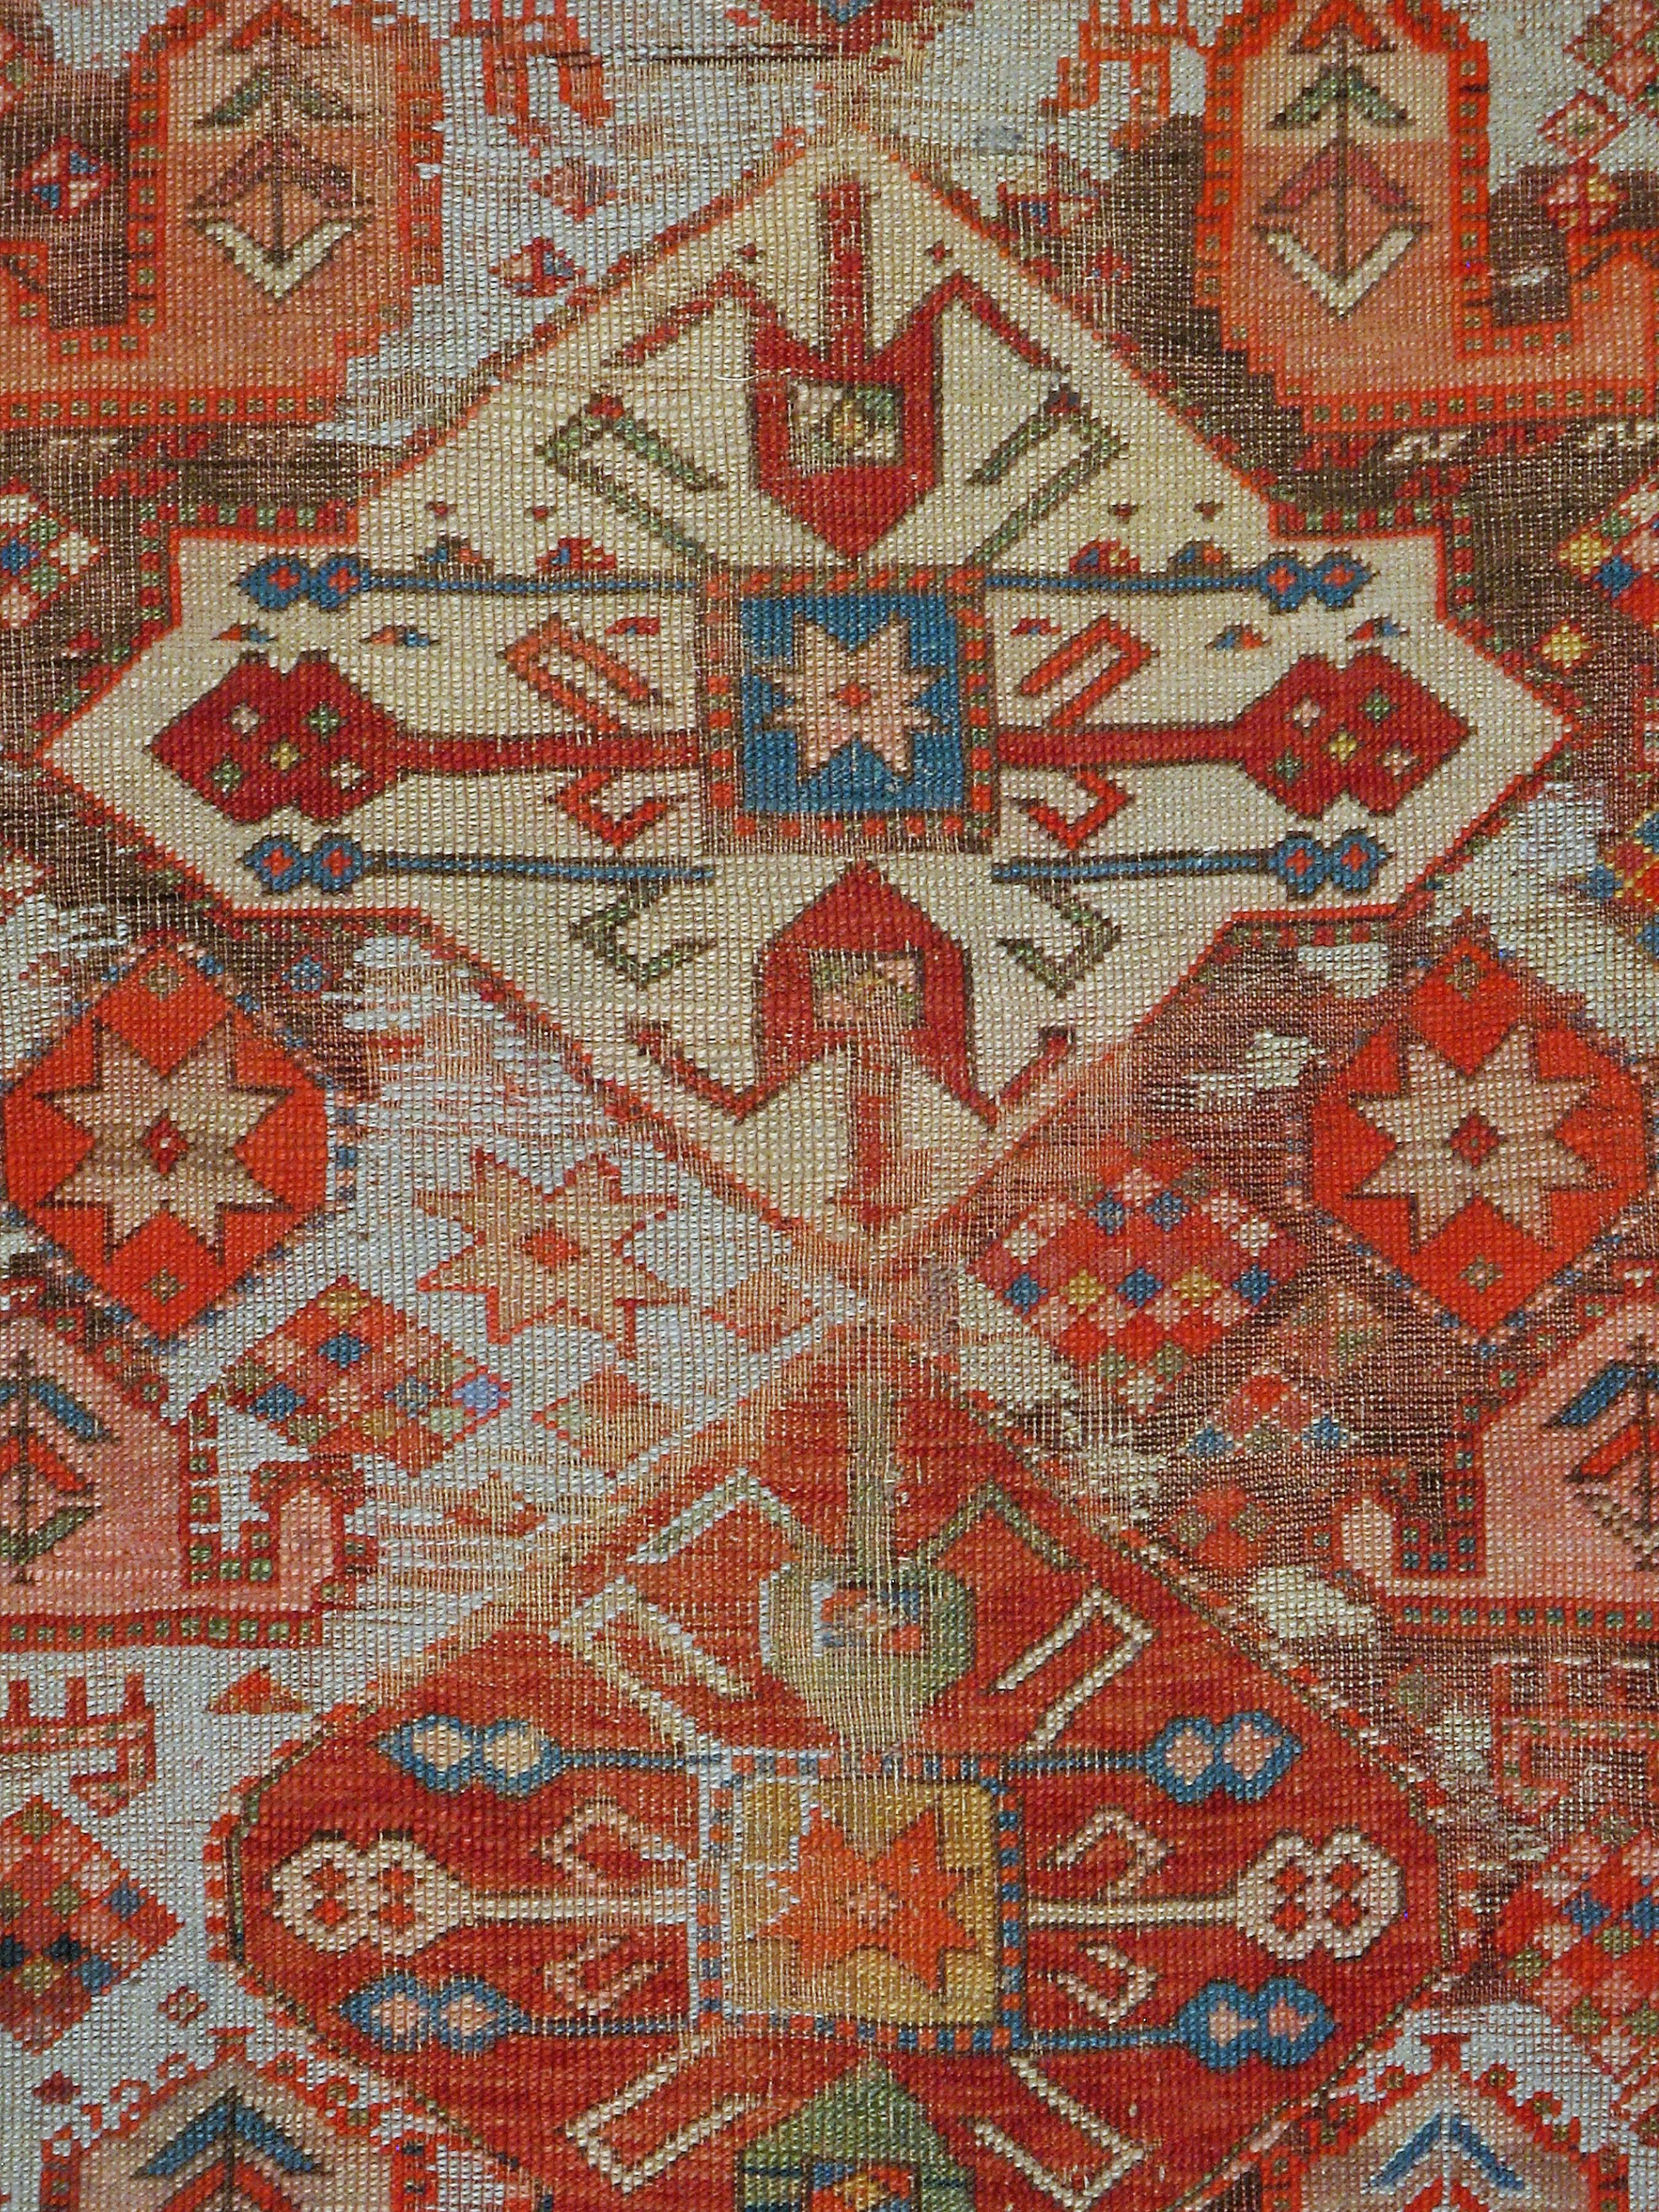 An antique Russian Kazak carpet from the first quarter of the 20th century.